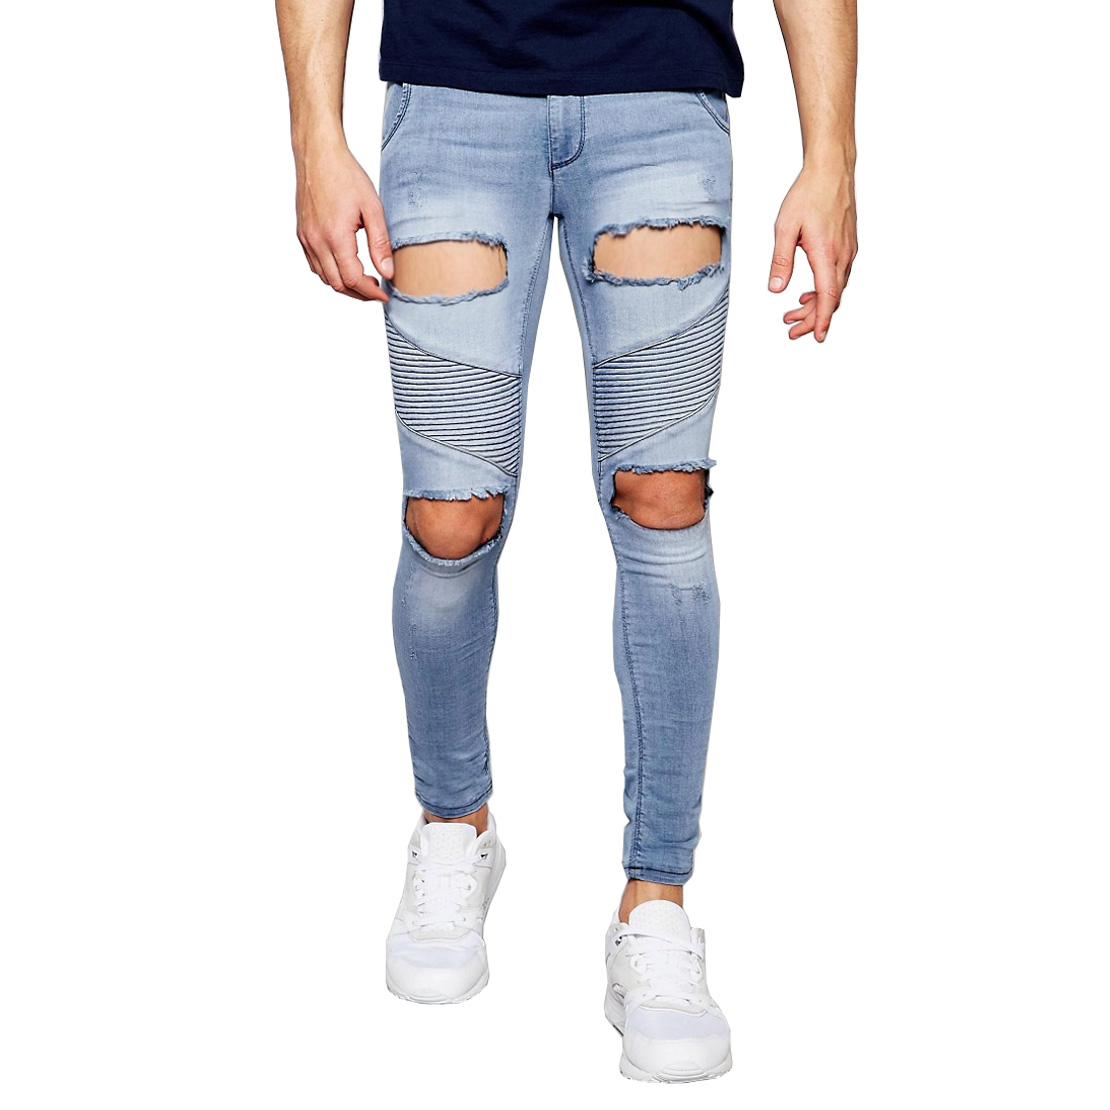 ripped jeans extreme